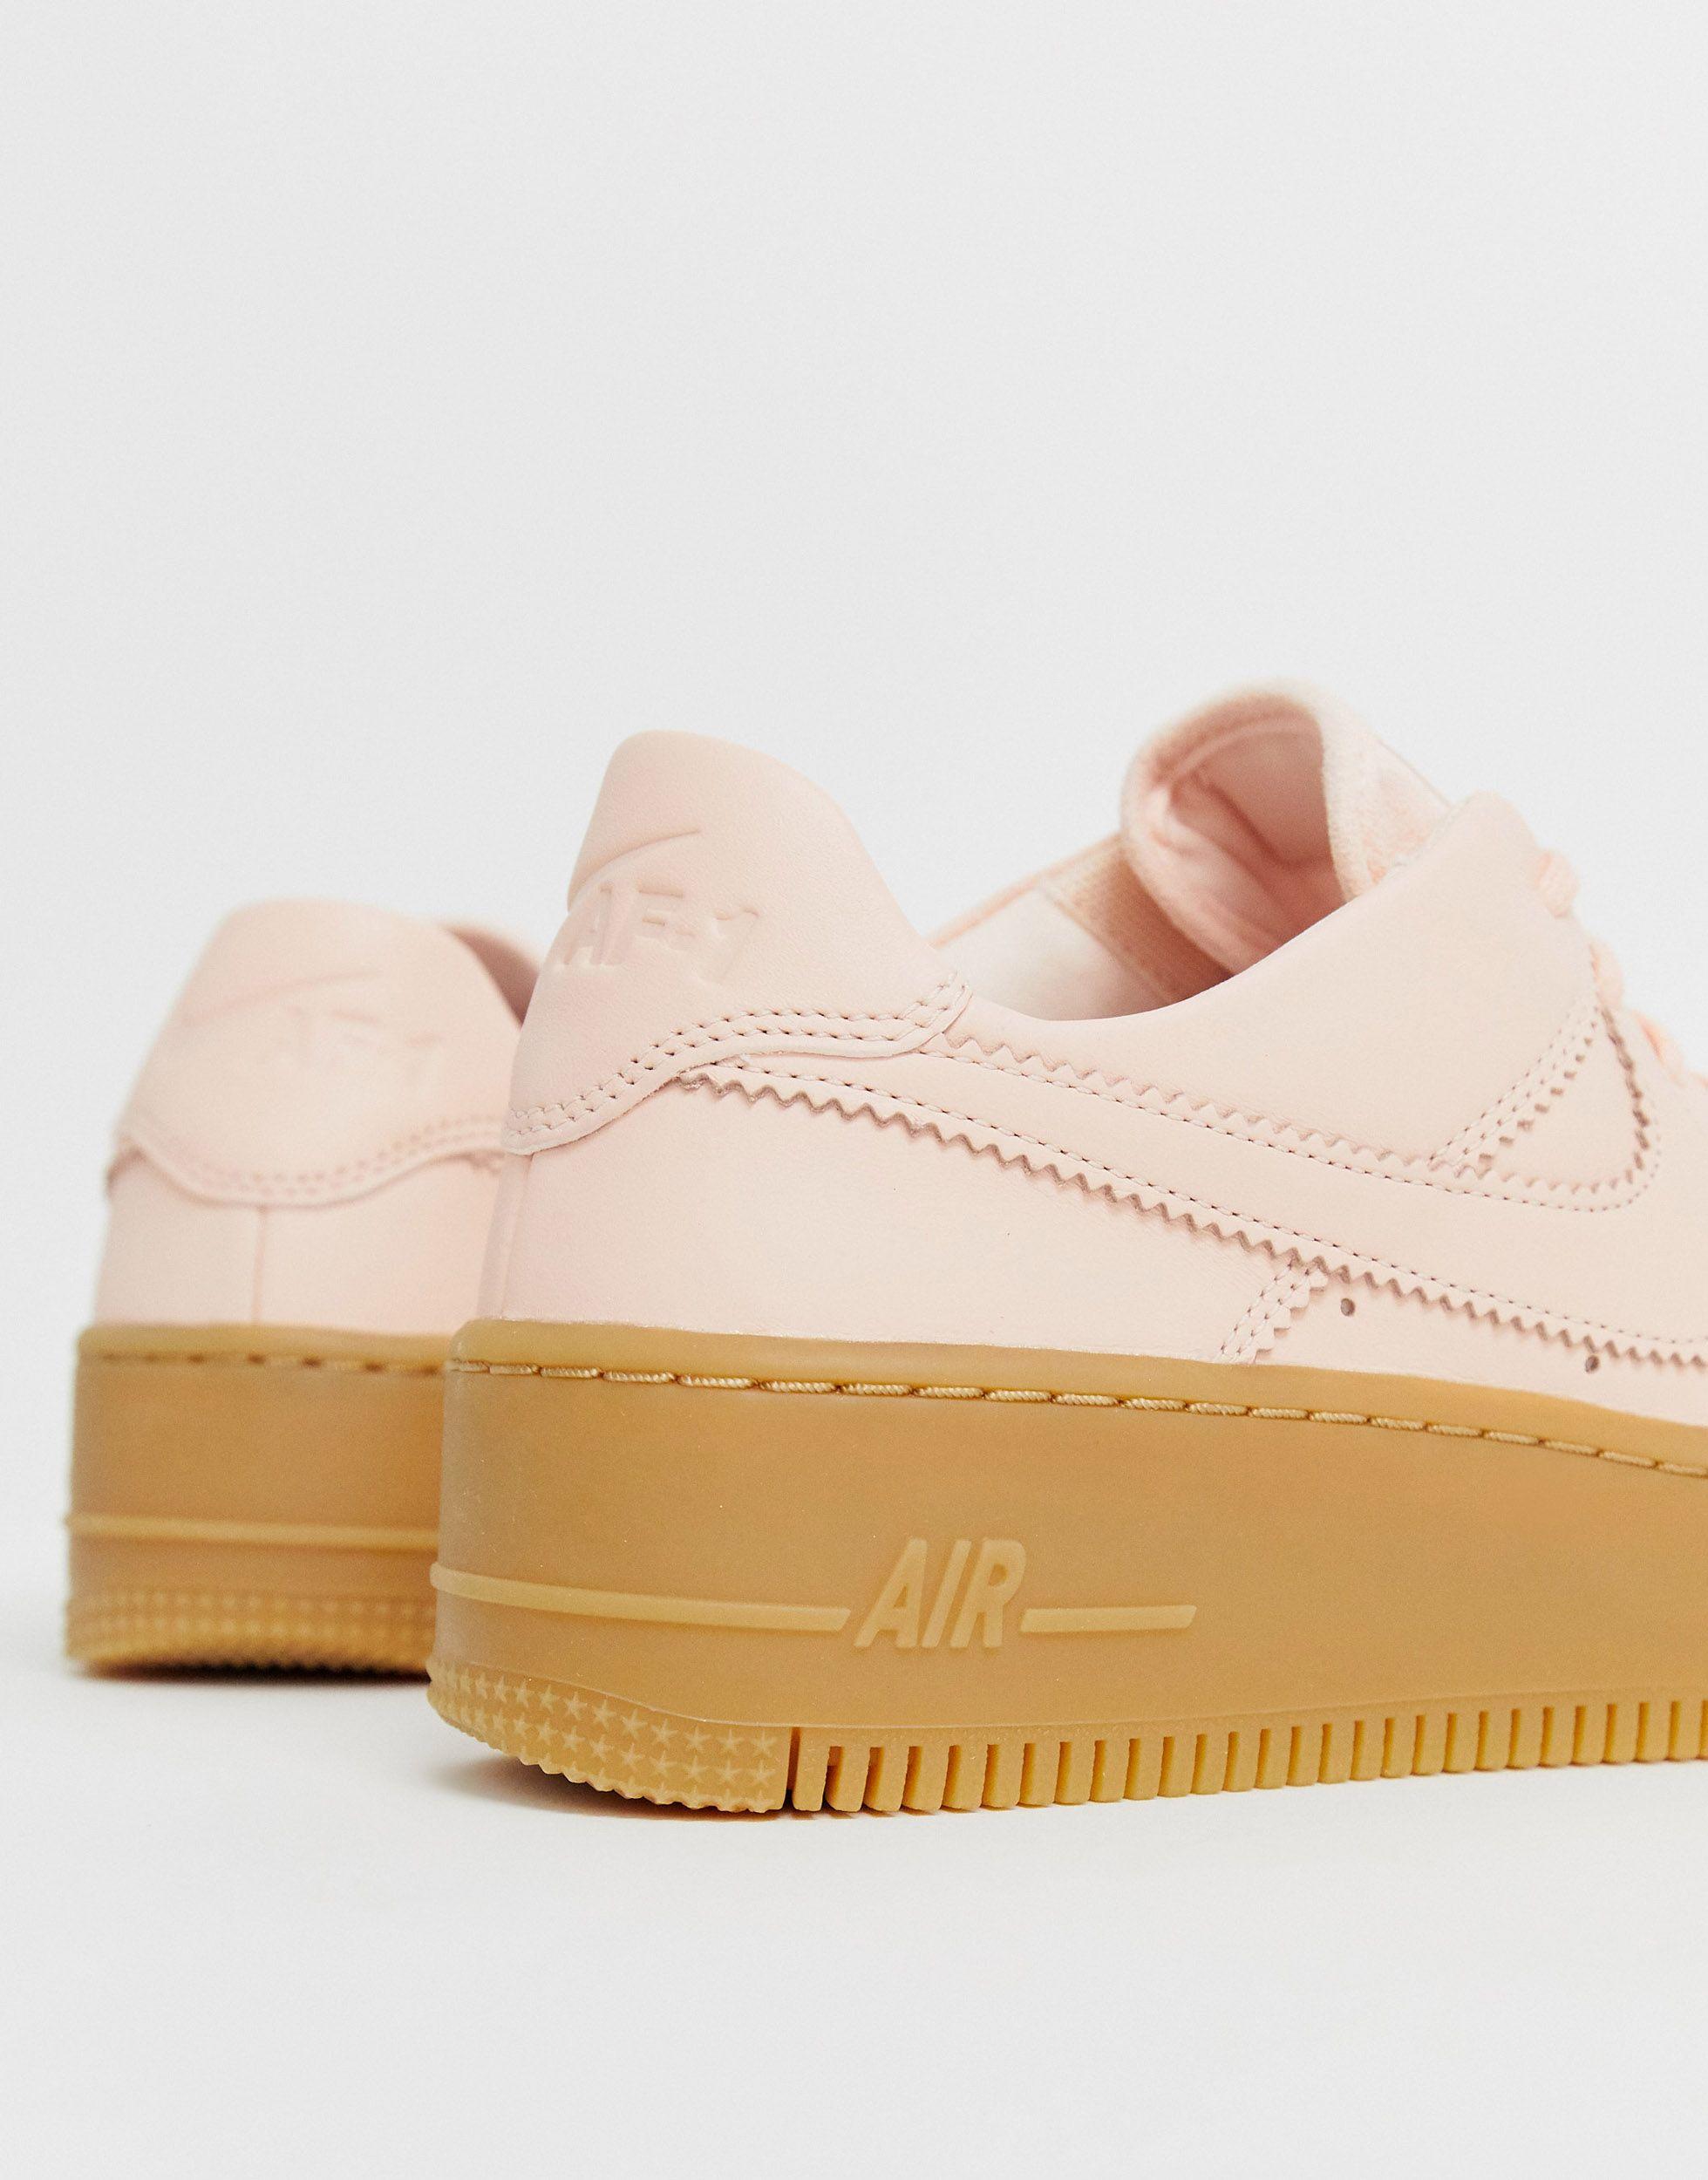 Nike Pale Gum Sole Air Force 1 Sage Low Trainers in Pink | Lyst